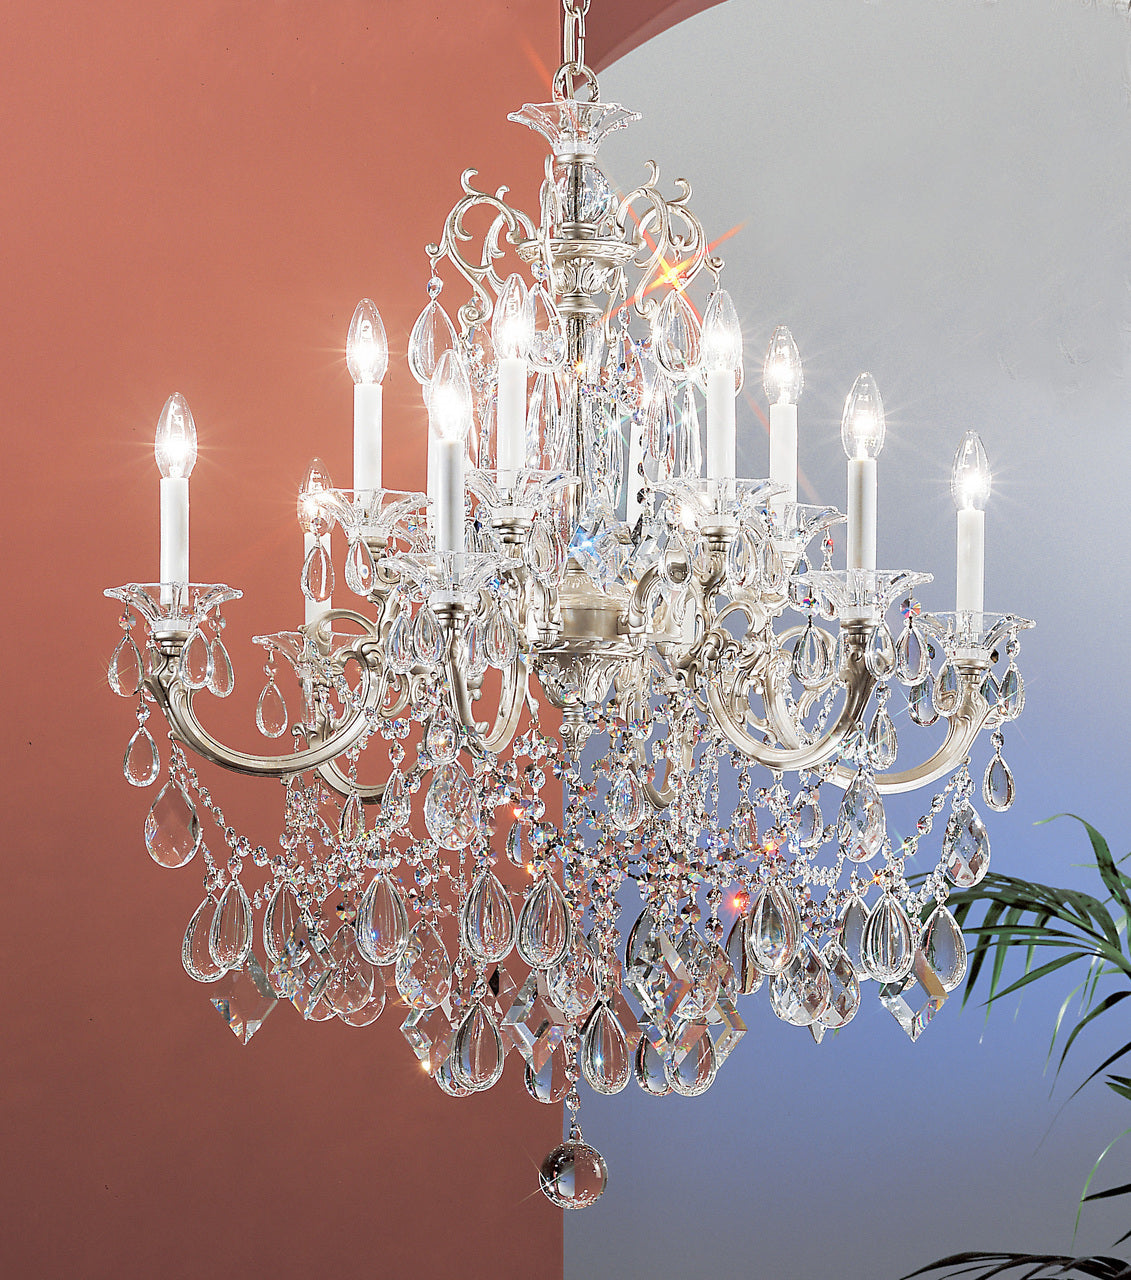 Classic Lighting 57024 CHP SJT Via Venteo Crystal Chandelier in Champagne Pearl (Imported from Spain)